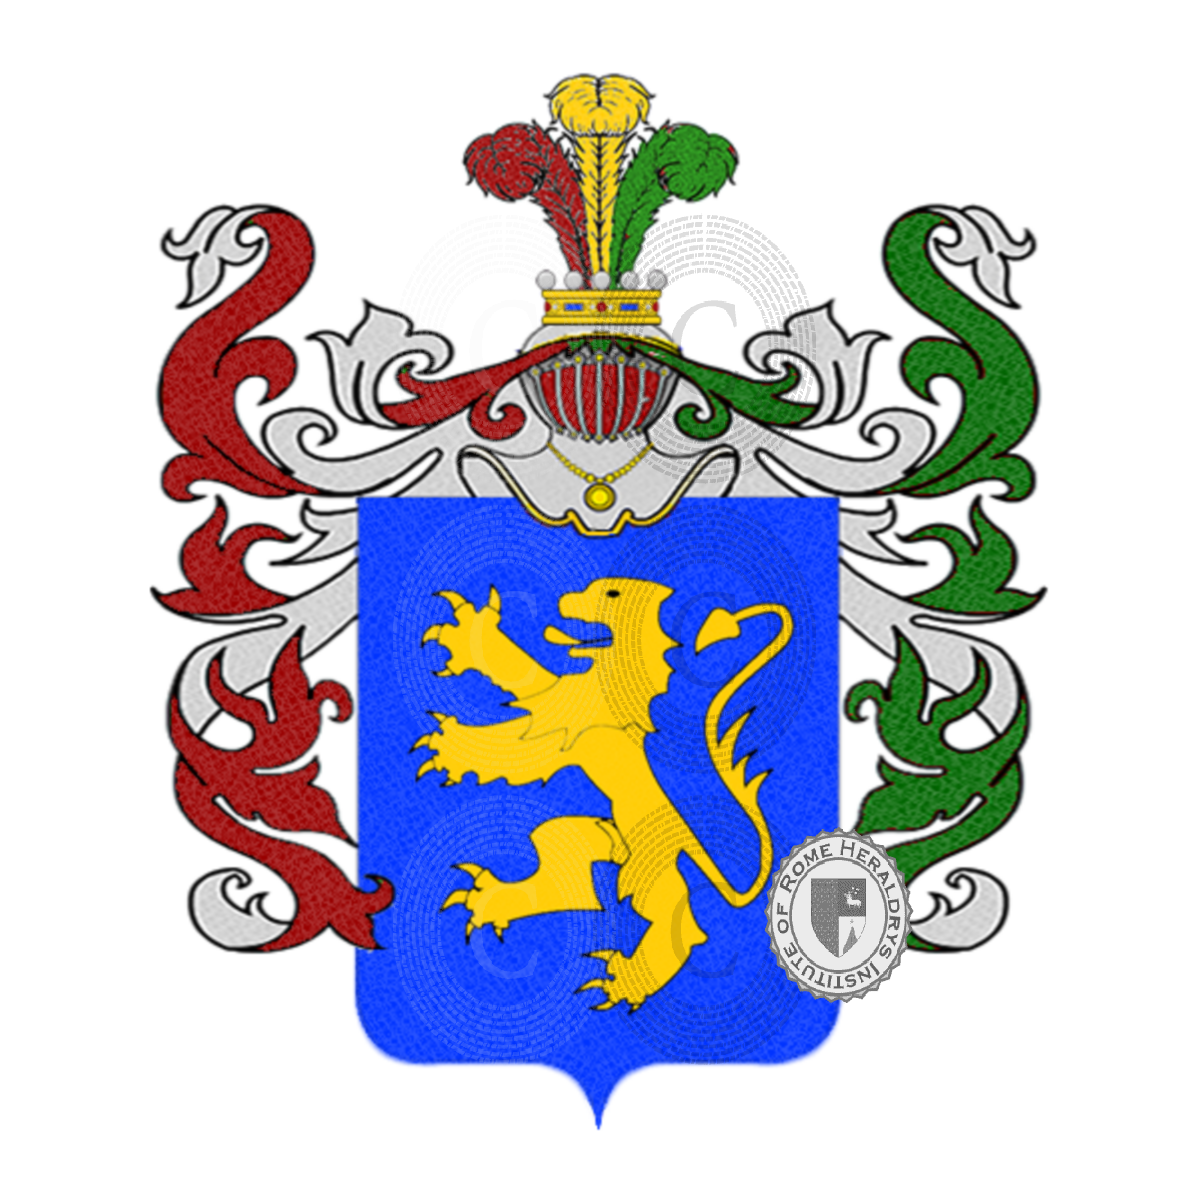 Coat of arms of familyghersi